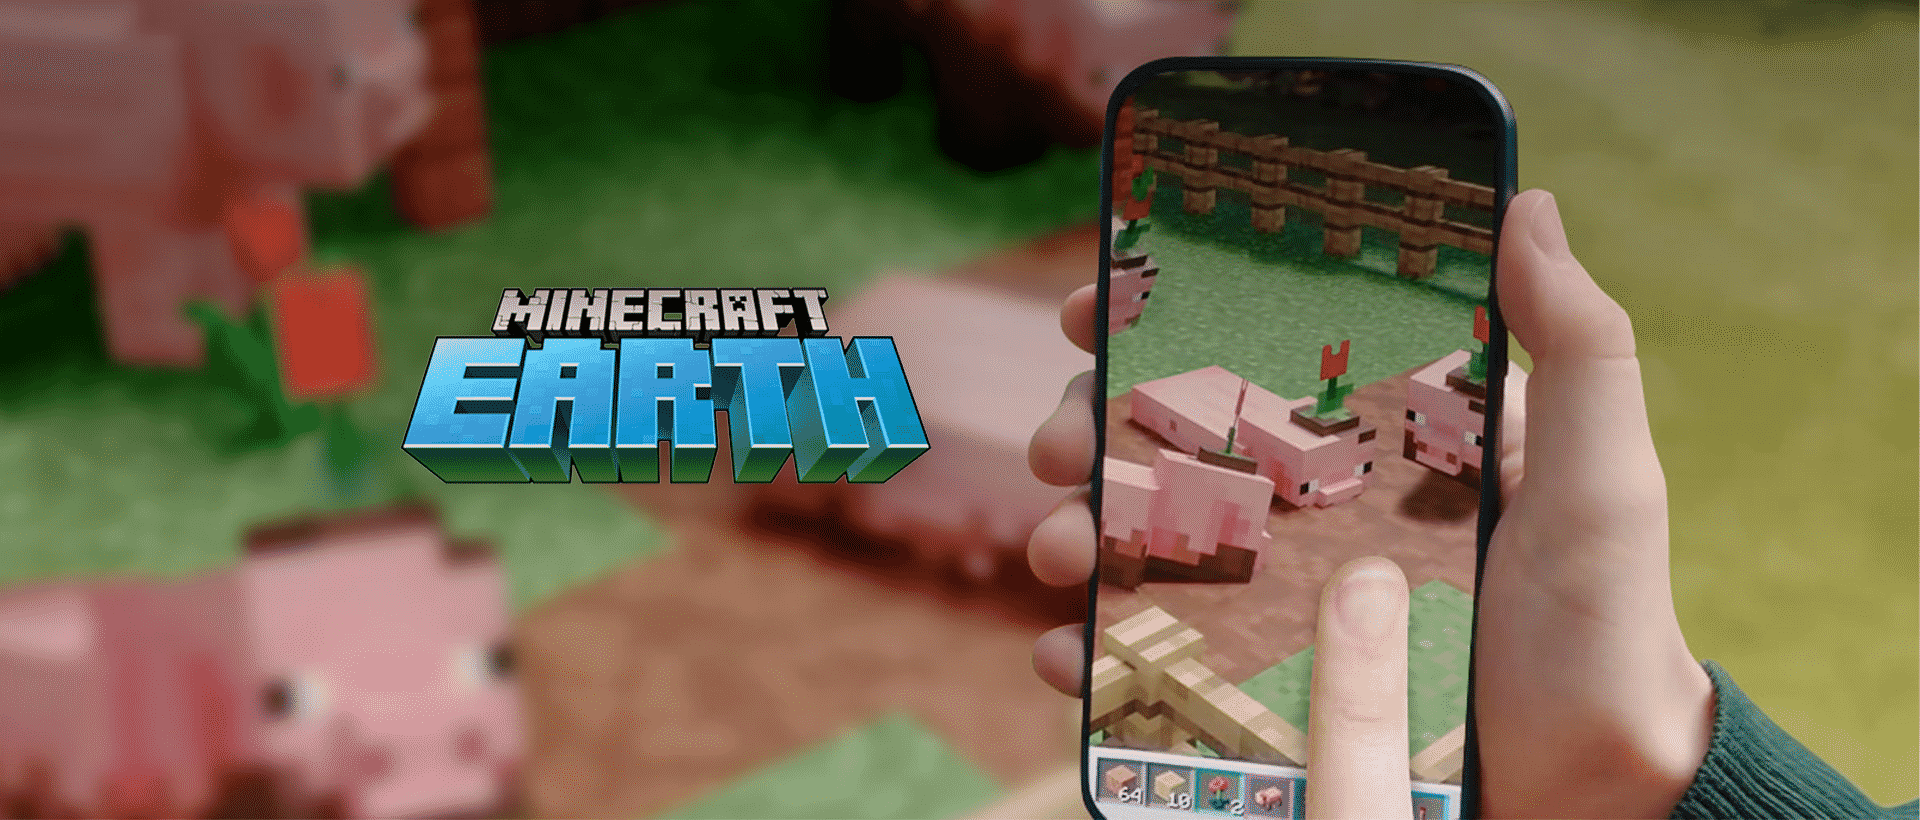 Download-Minecraft-Earth